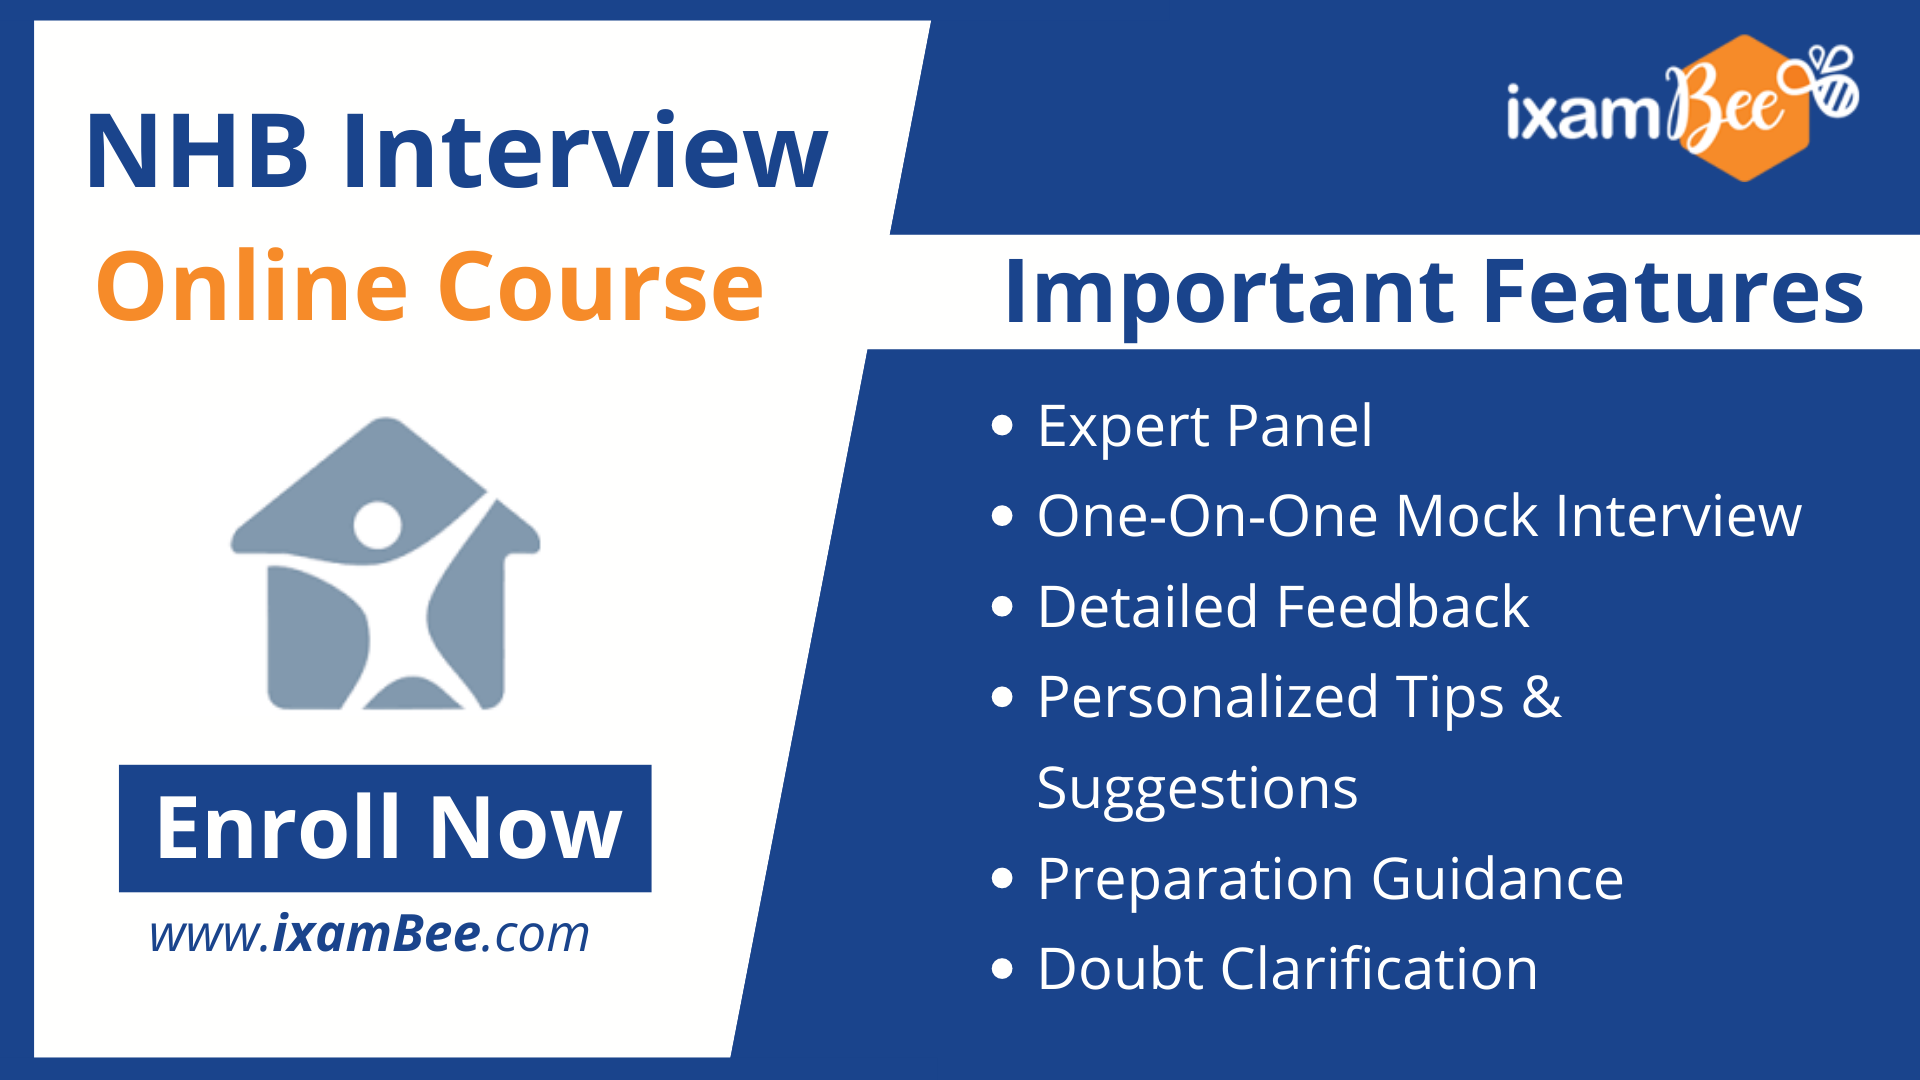 NHB Interview Online Course